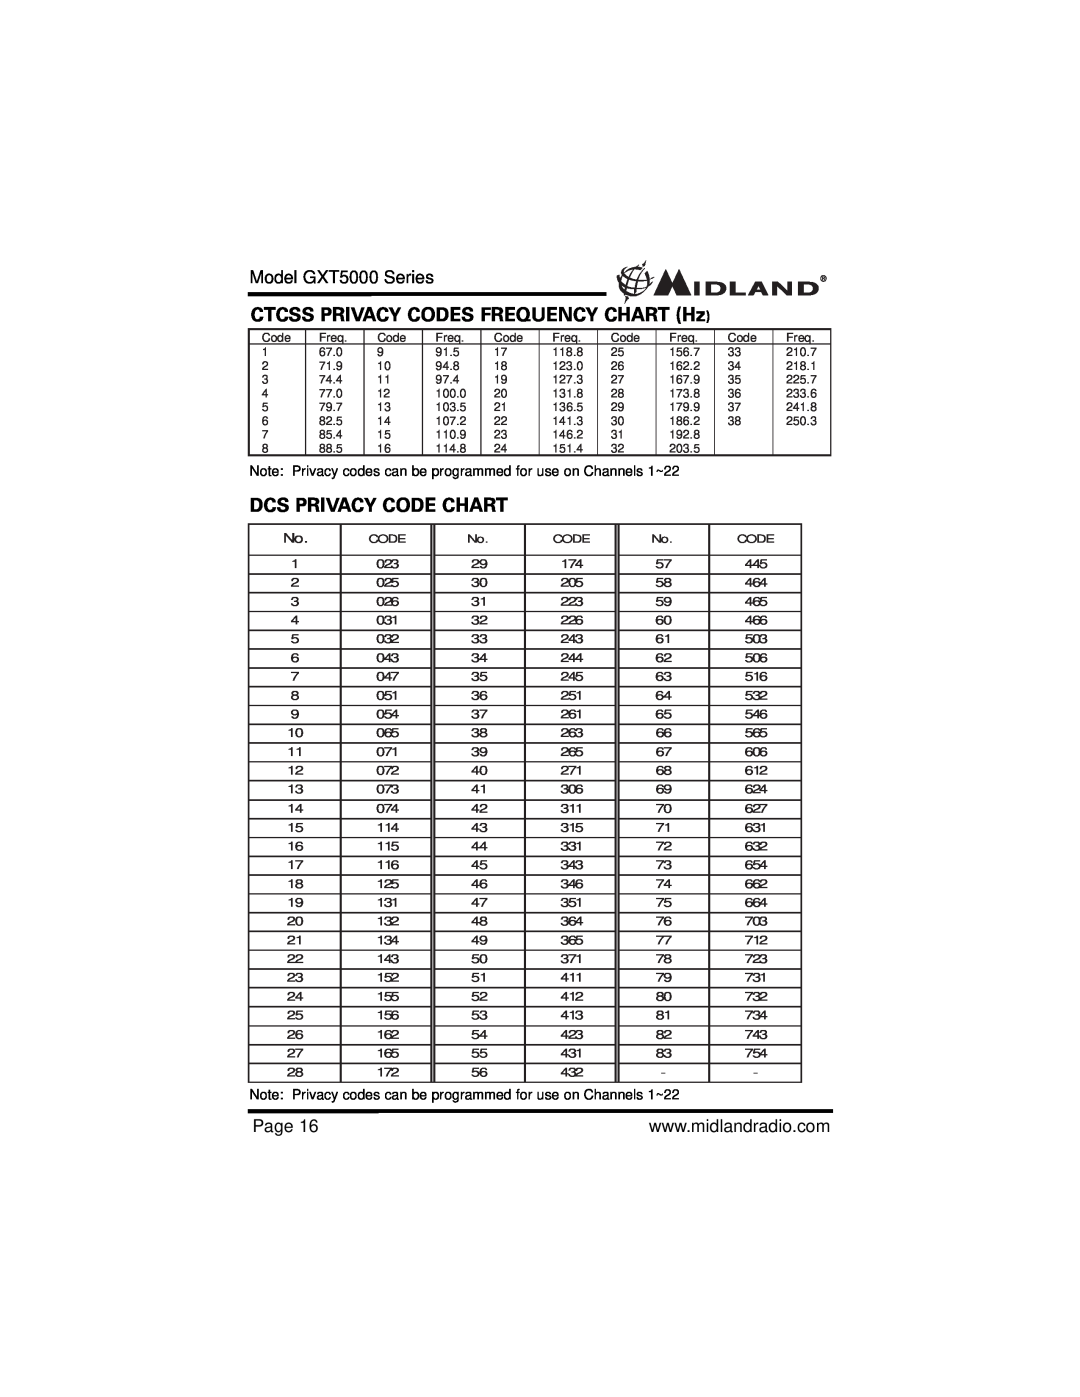 Midland Radio GXT5000 specifications CTCSS PRIVACY CODES FREQUENCY CHART Hz, Dcs Privacy Code Chart 